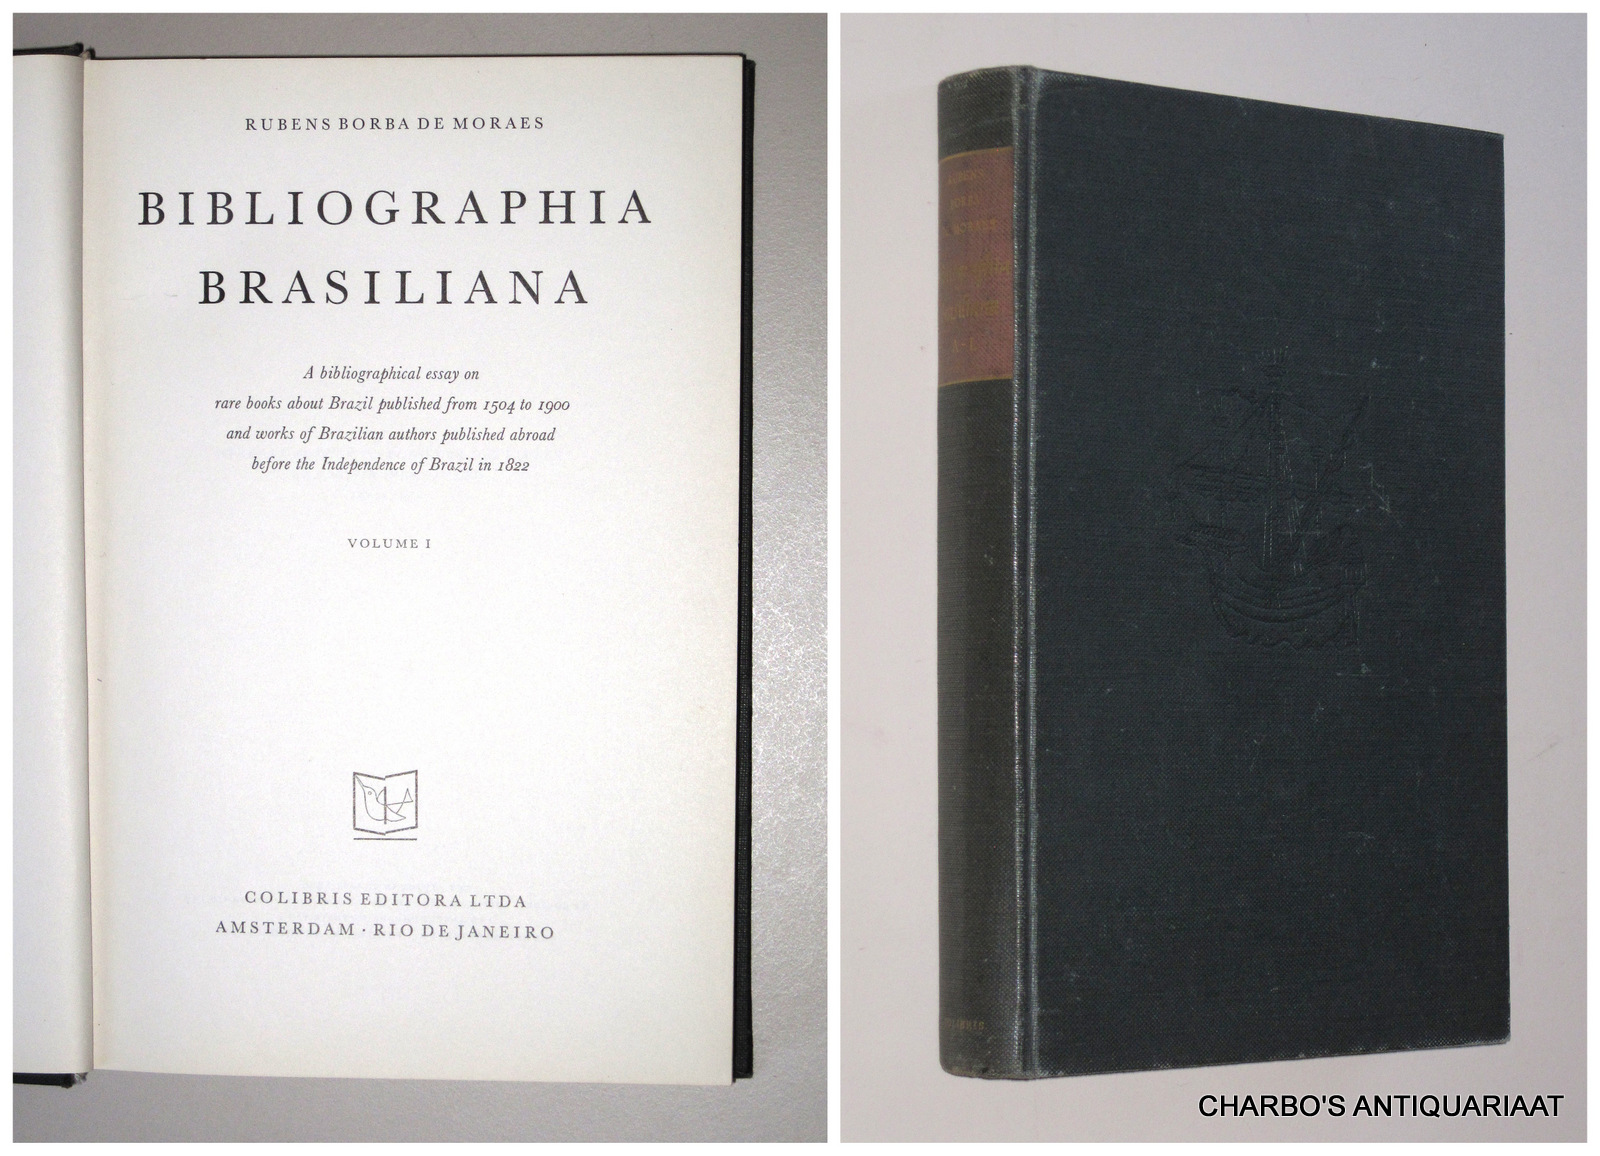 BORBA DE MORAES, RUBENS, -  Bibliographia Brasiliana. A bibliographical essay on rare books about Brazil from 1504 to 1900 and works of Brazilian authors published abroad before the independence of Brazil in 1822. Volume I.